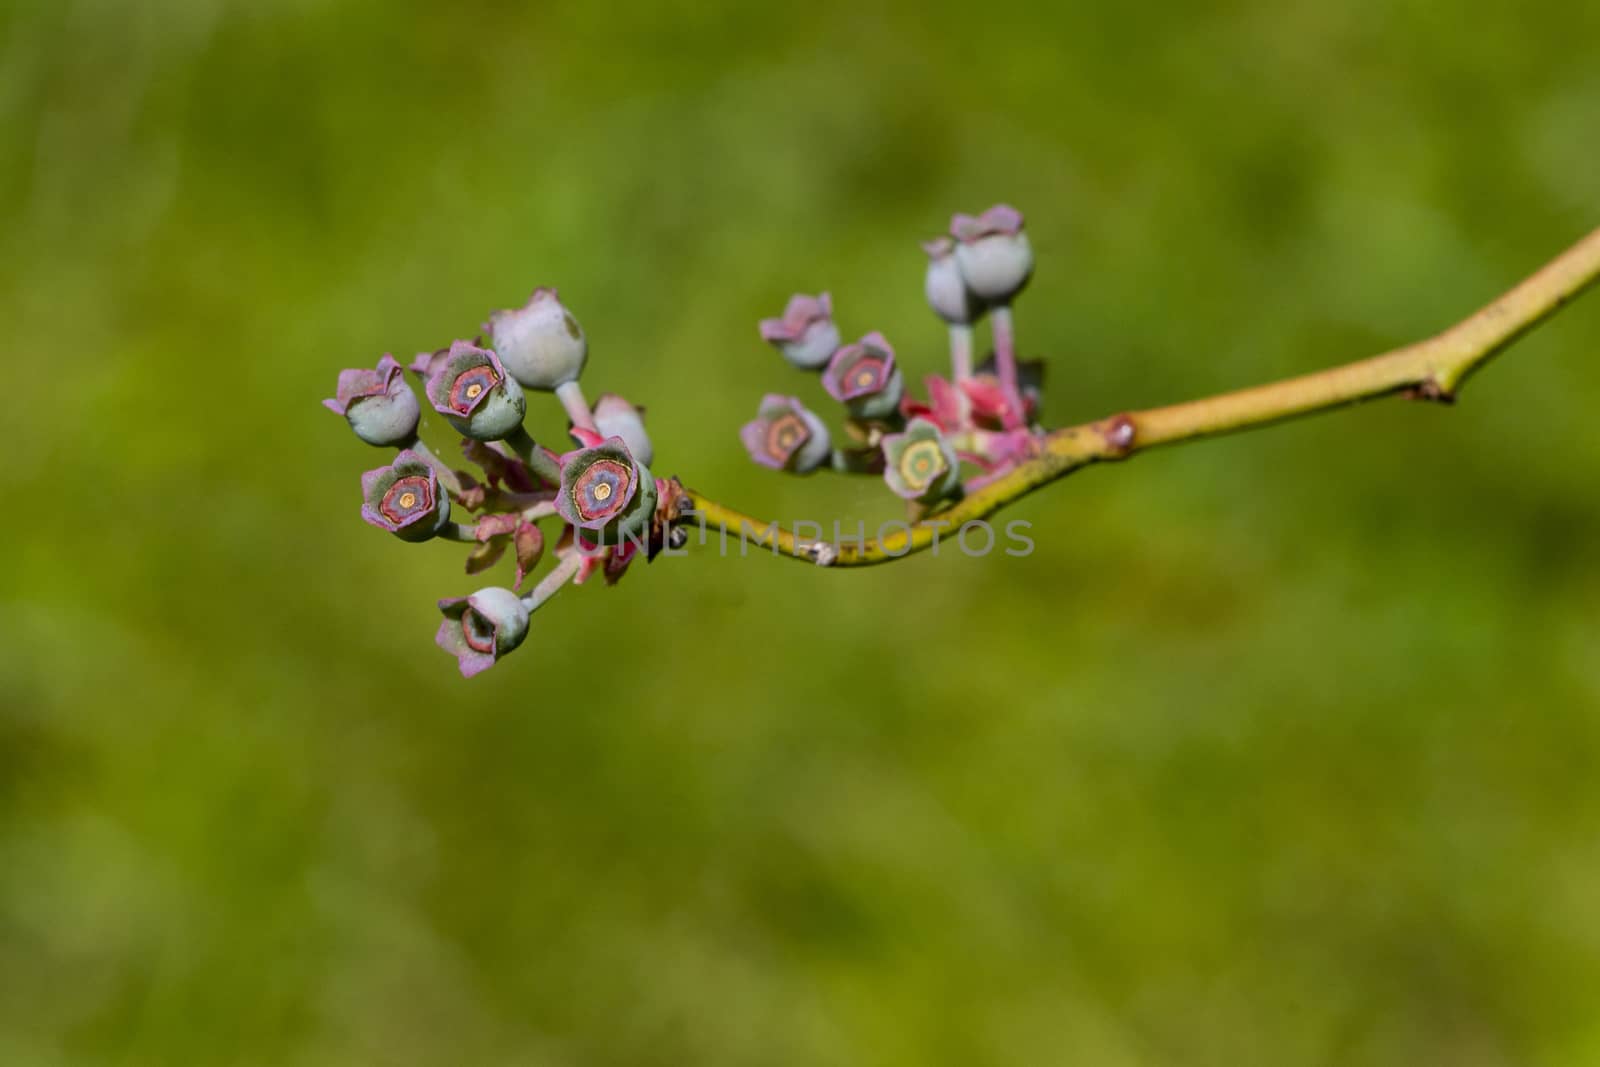 Colorful Early Stage Blueberry Fruit by CharlieFloyd